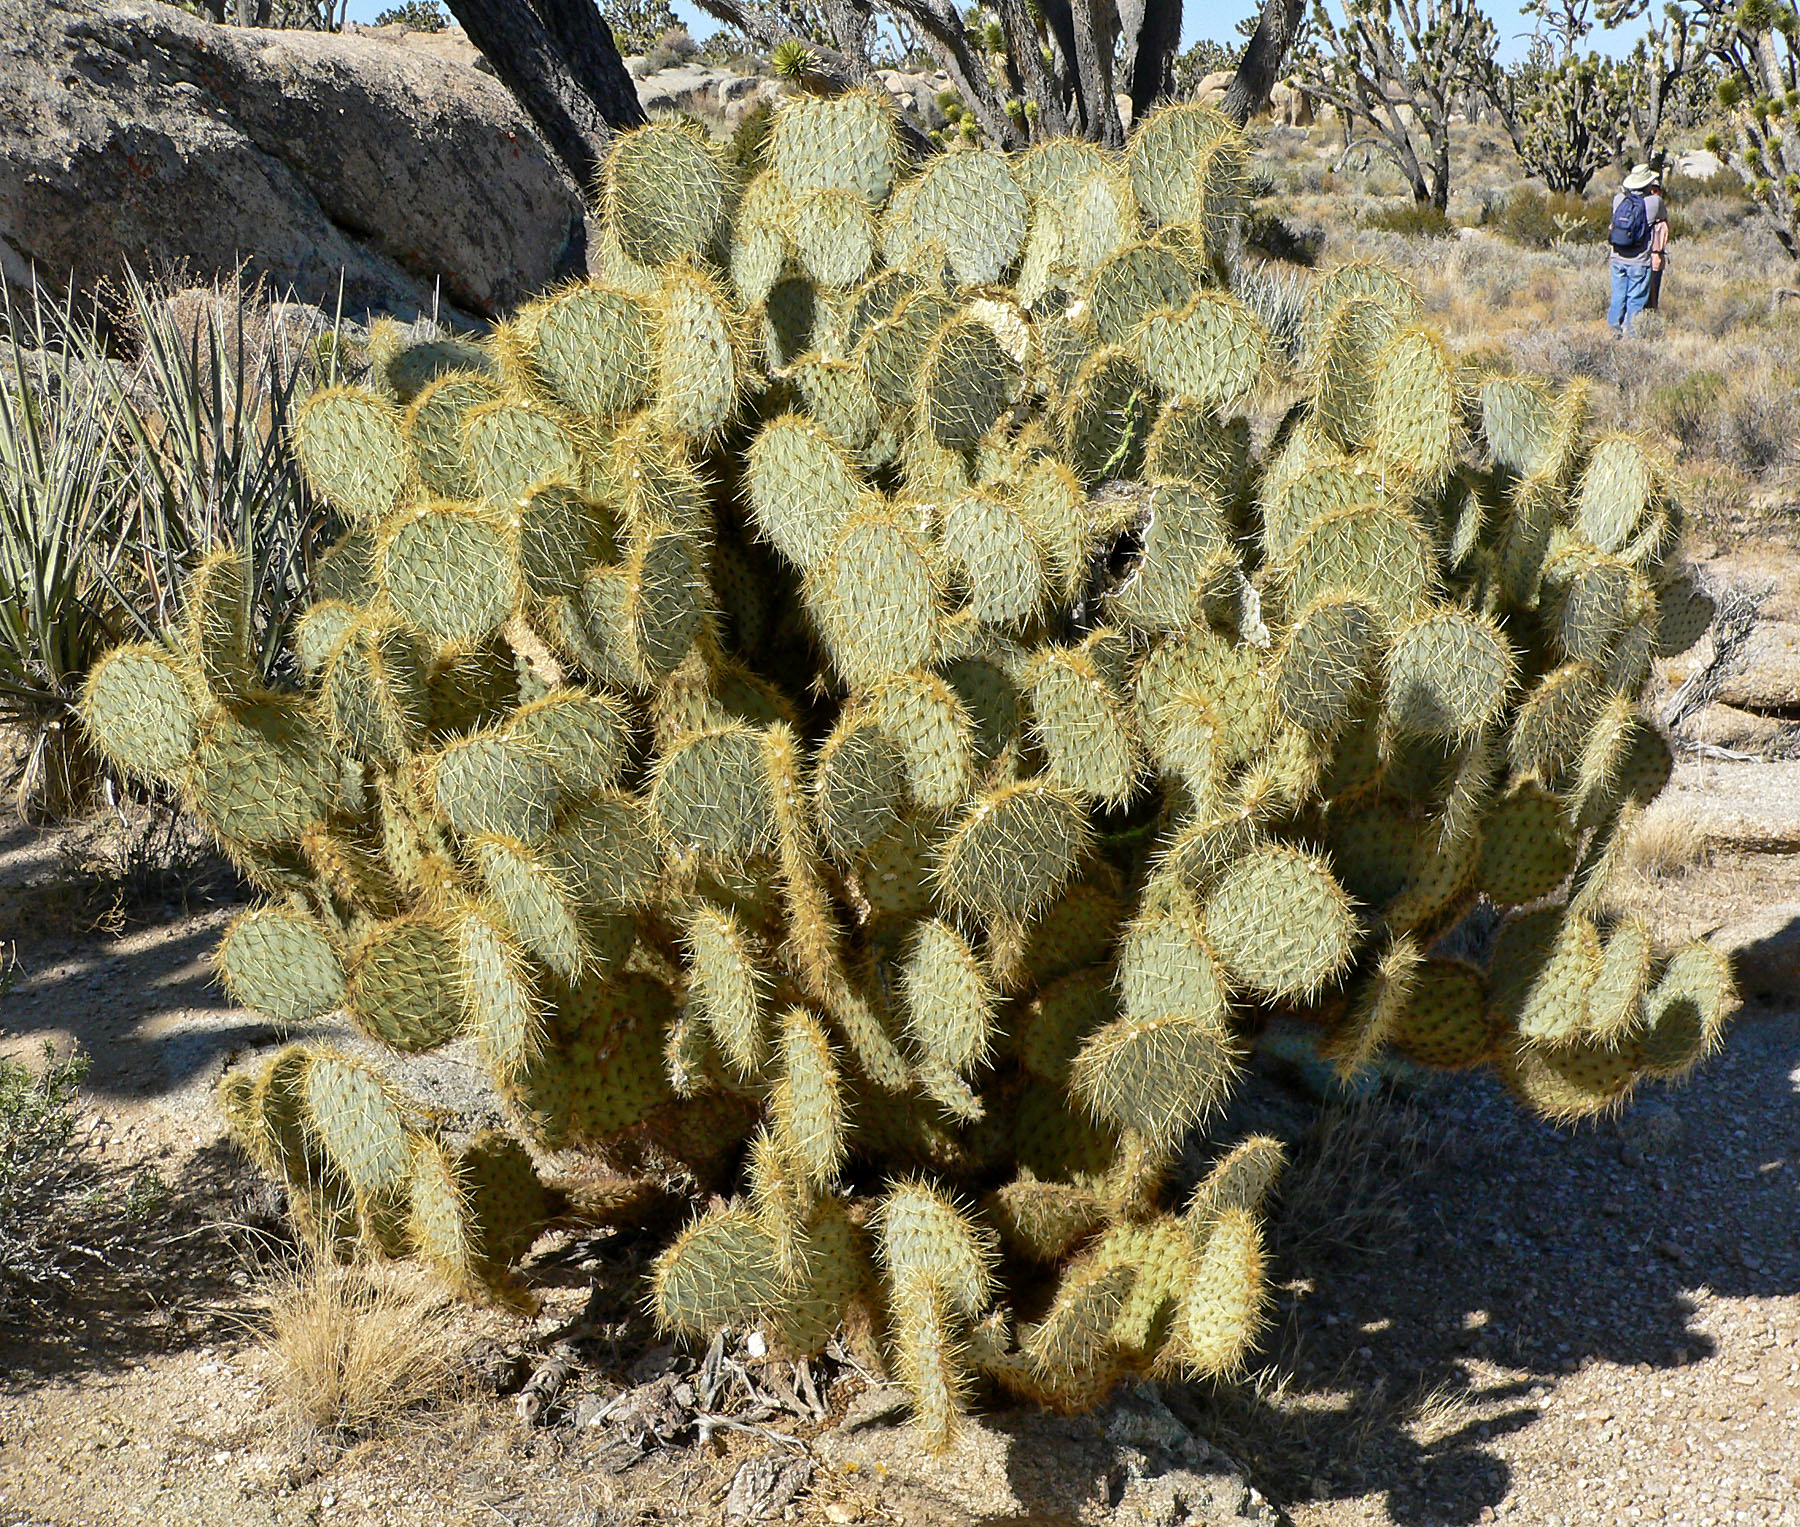 Prickly Pear Cactus provided courtesy of Wikimedia Commons